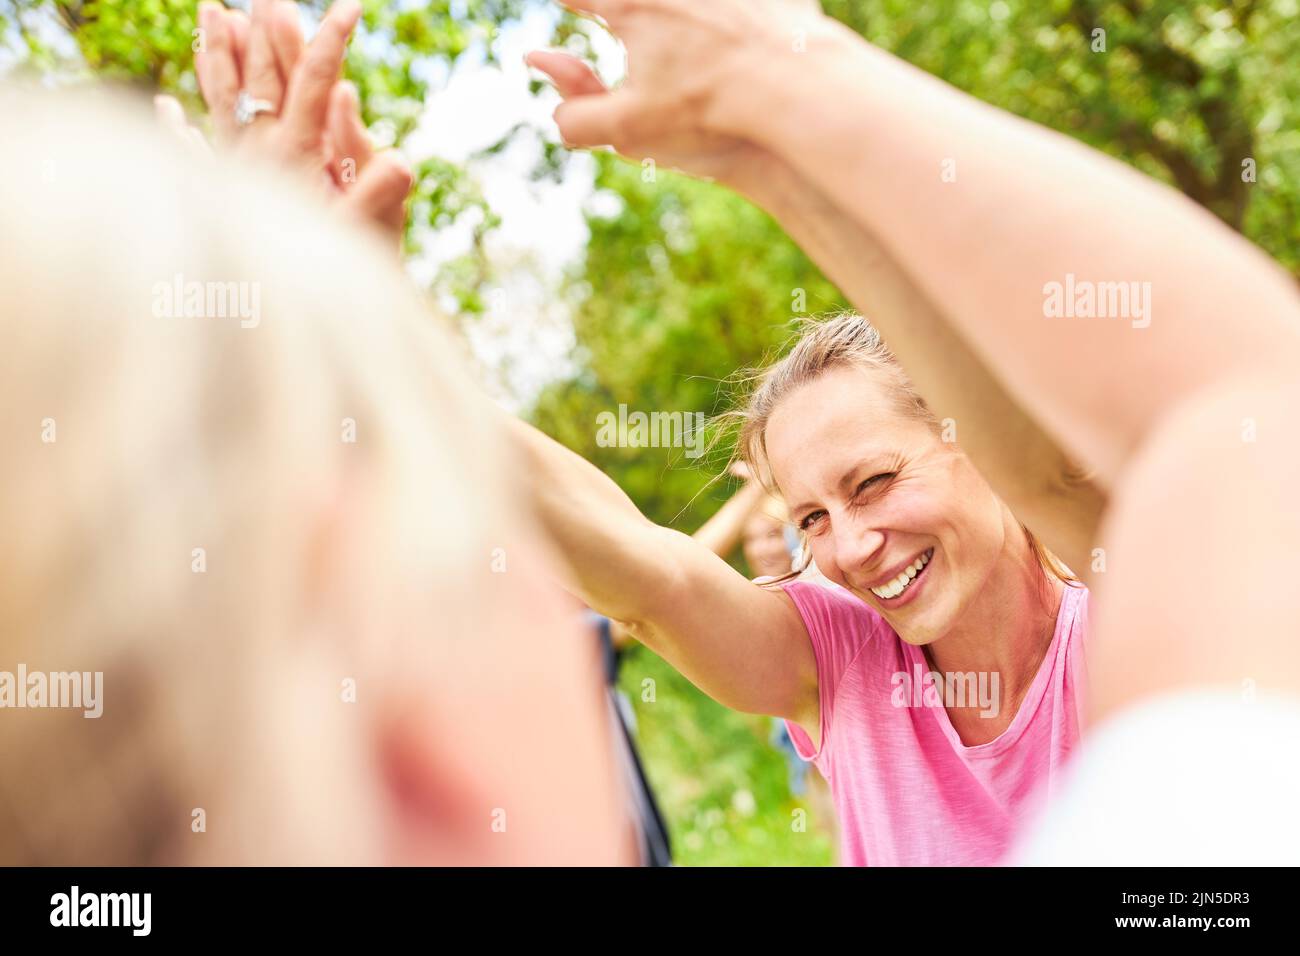 Young woman is happy with her team about a victory and celebrates success by giving high five Stock Photo